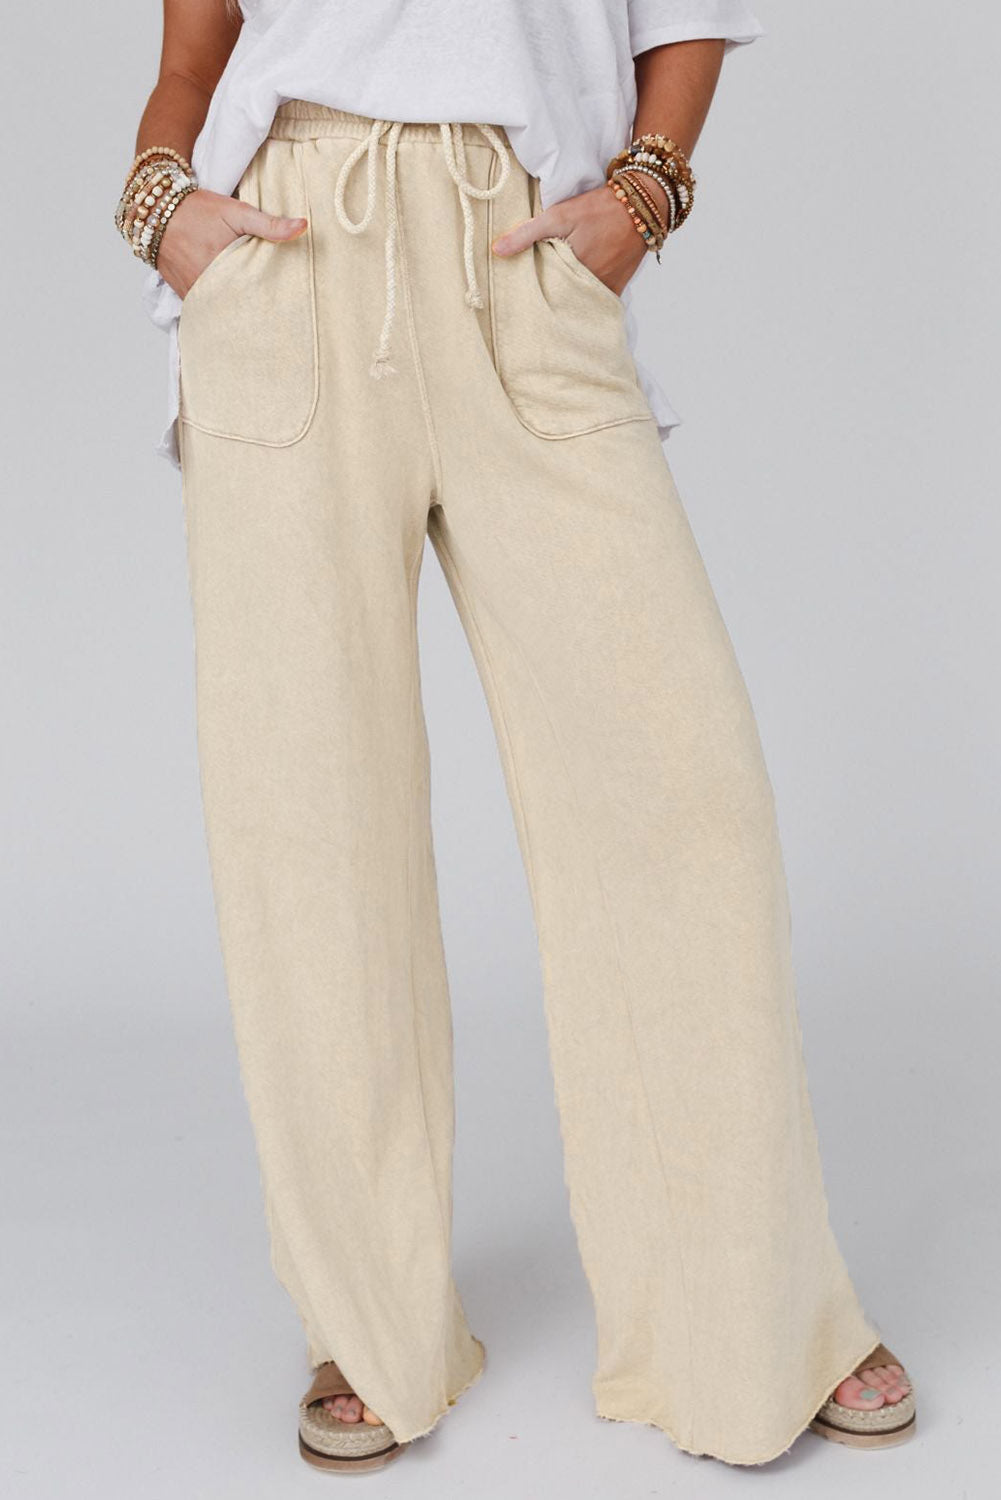 Wide Leg Pocketed Pants - White / S - Bottoms - Pants - 4 - 2024